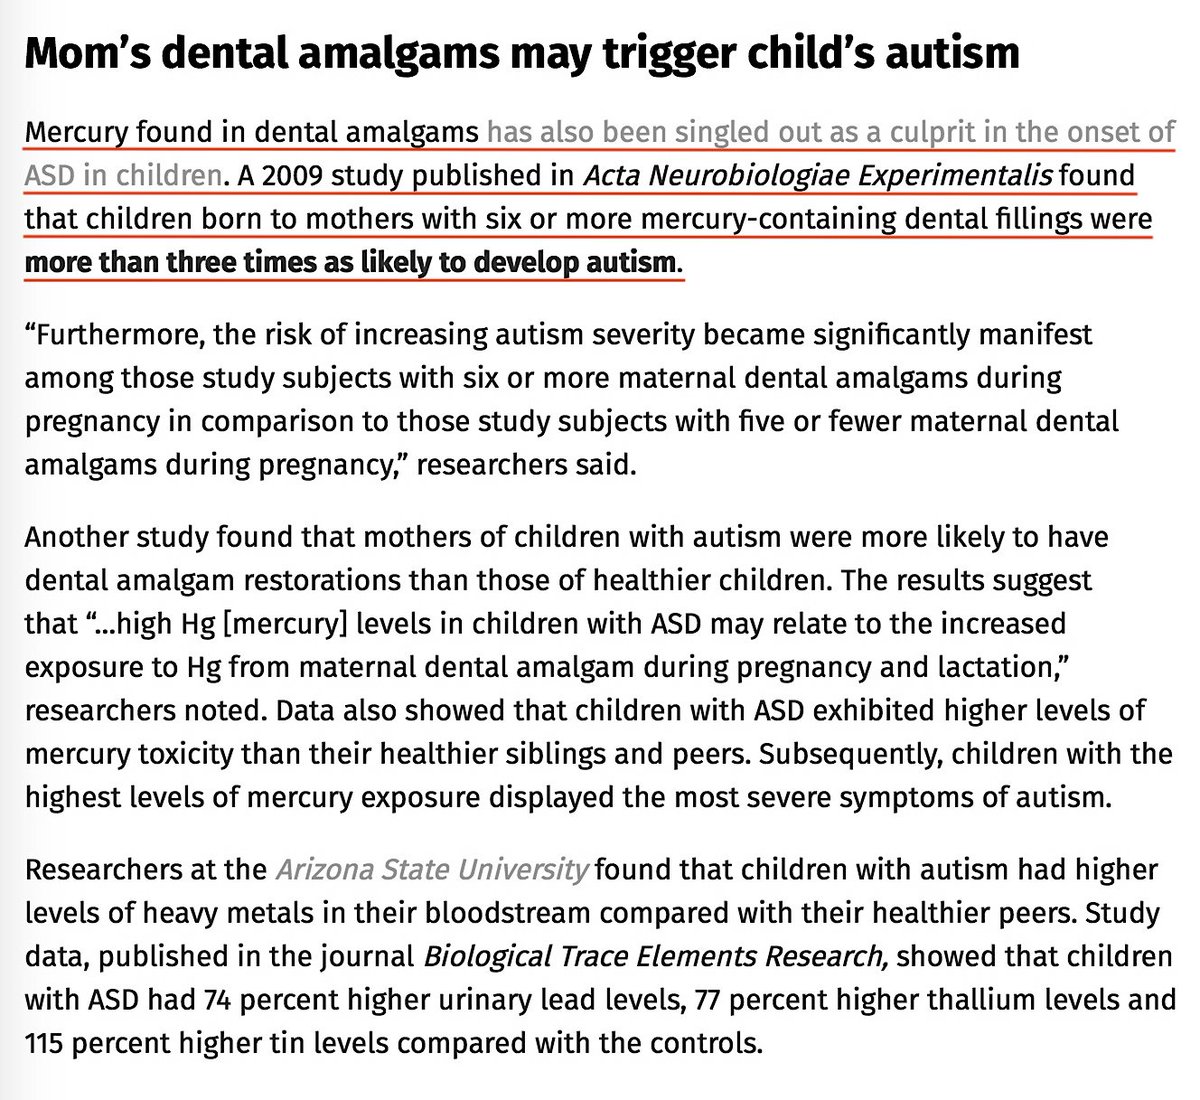 The Scientific Community Has Been Raising Safety Concerns About Mercury-Based Products For Years. Is Dental Amalgam Also Contributing To The Autism Epidemic?January 17, 2019 https://www.vaccines.news/2019-01-17-autism-mercury-in-dental-amalgram-and-thimerosal-in-flu-shots.html #QAnon  #Vaccine  #Autism  @potus